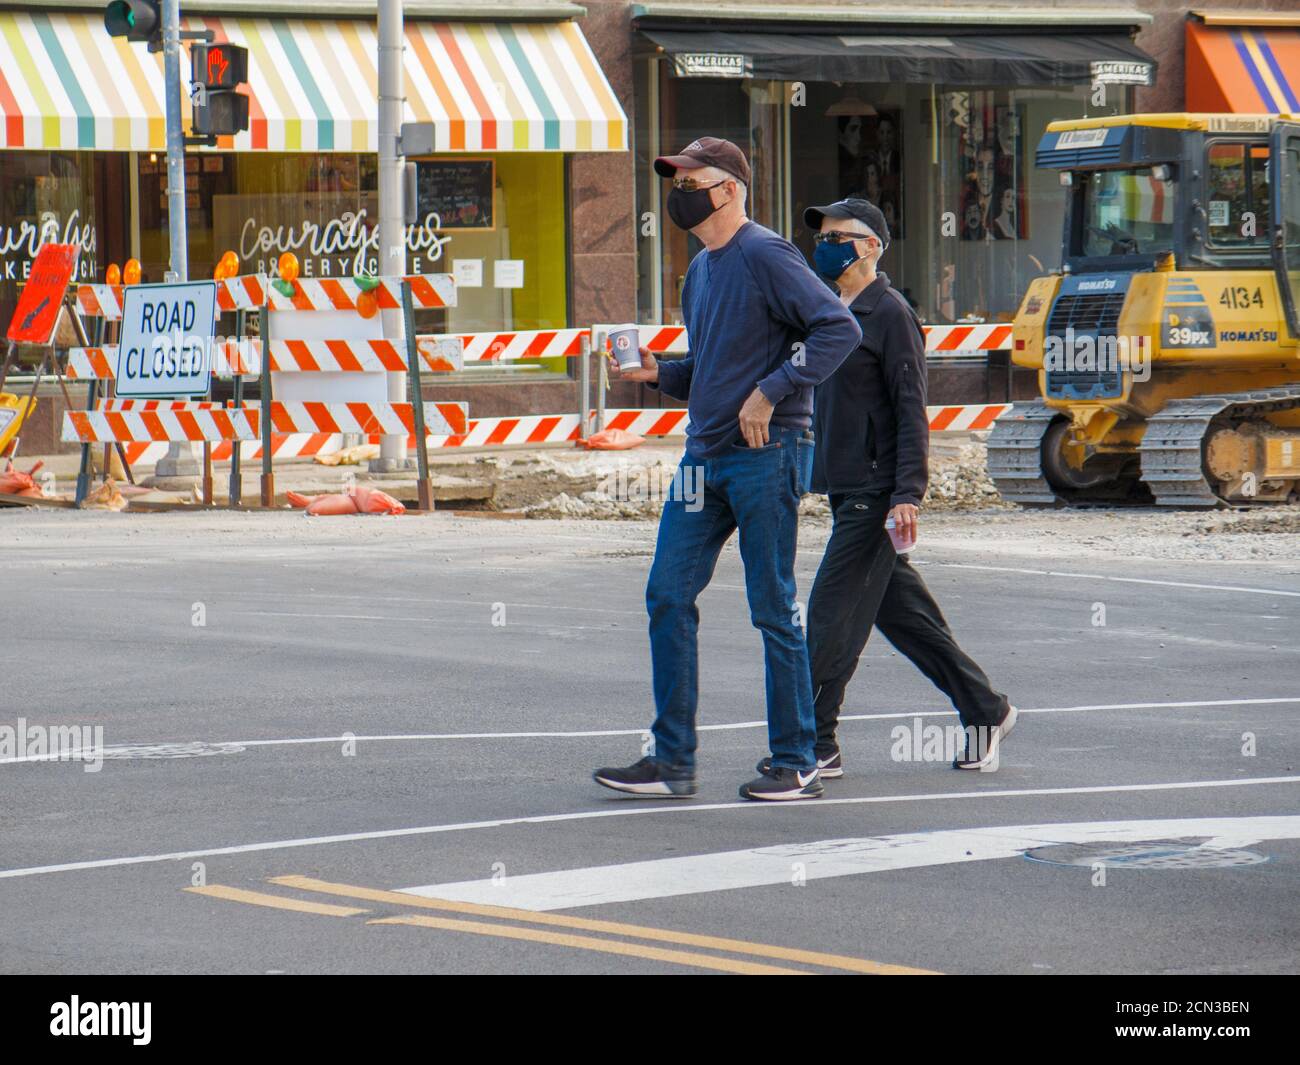 Two men wearing face masks crossing street during COVID-19 pandemic. Oak Park, Illinois. Stock Photo